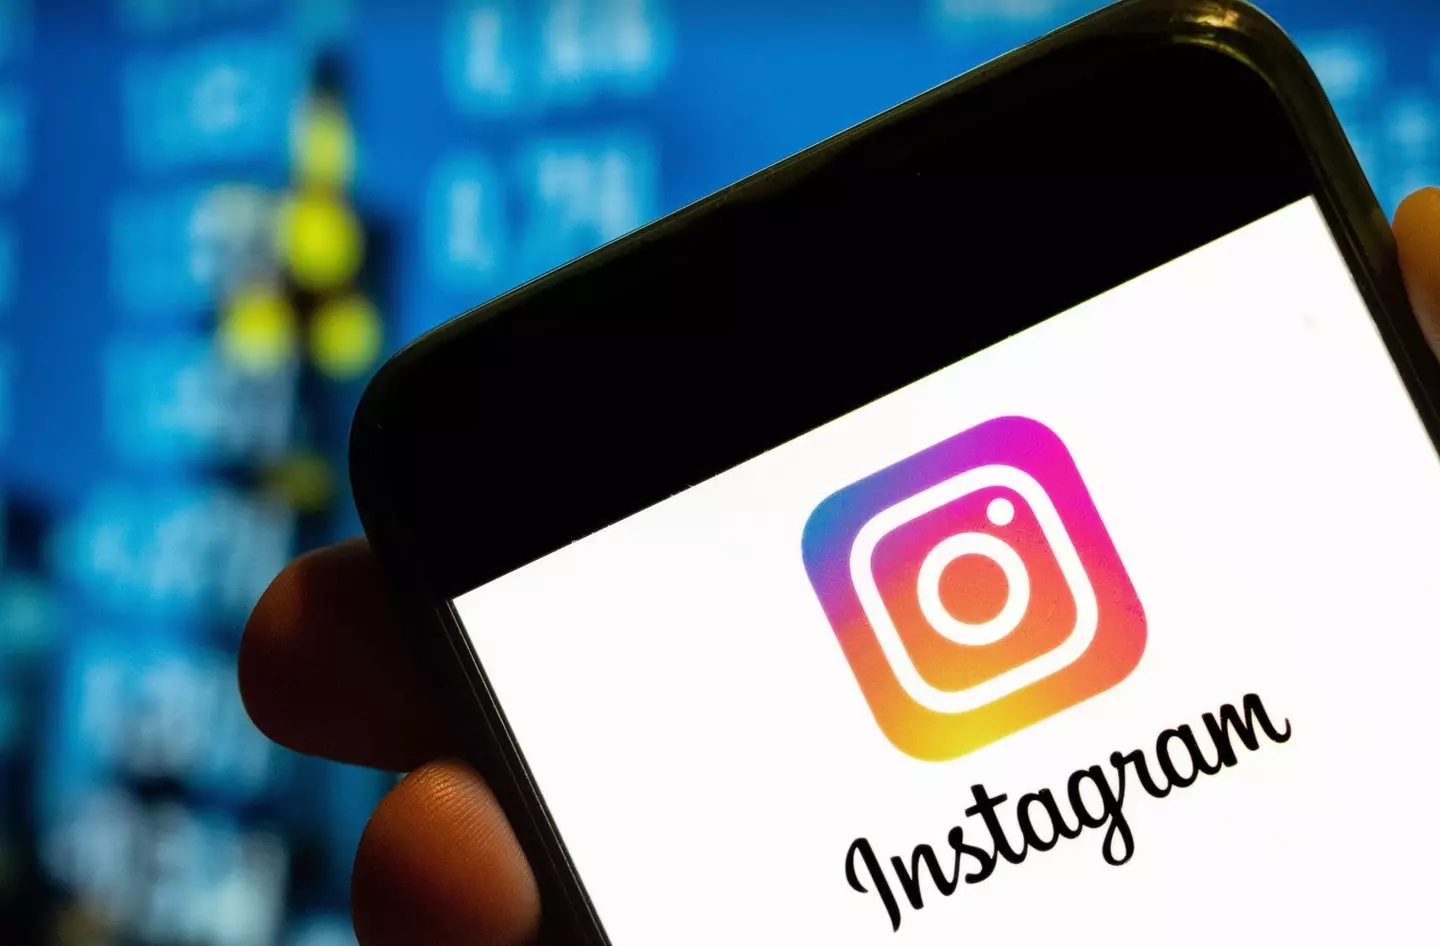 The Instagram algorithm has puzzled people for years. (Illustration by Budrul Chukrut/SOPA Images/LightRocket via Getty Images)